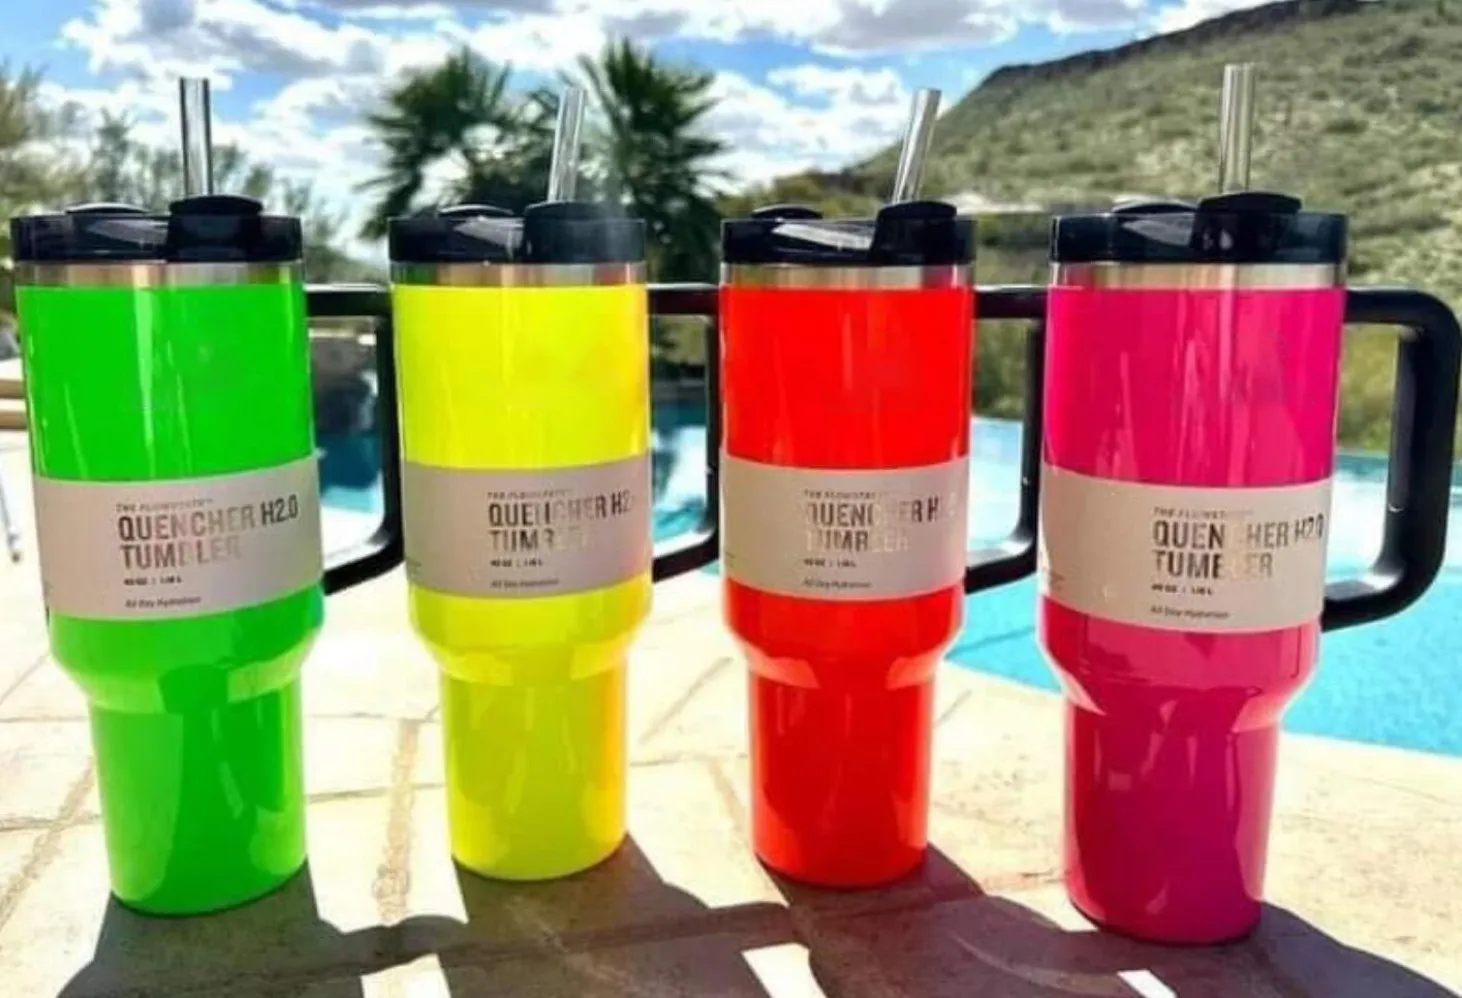 Electric 40oz Tumbler Yellow Orange Green Quencher H2.0 Rostfritt stål Tumblers Cups med silikonhandtag Lock Straw Winter Neon Pink Car Mugs 0417